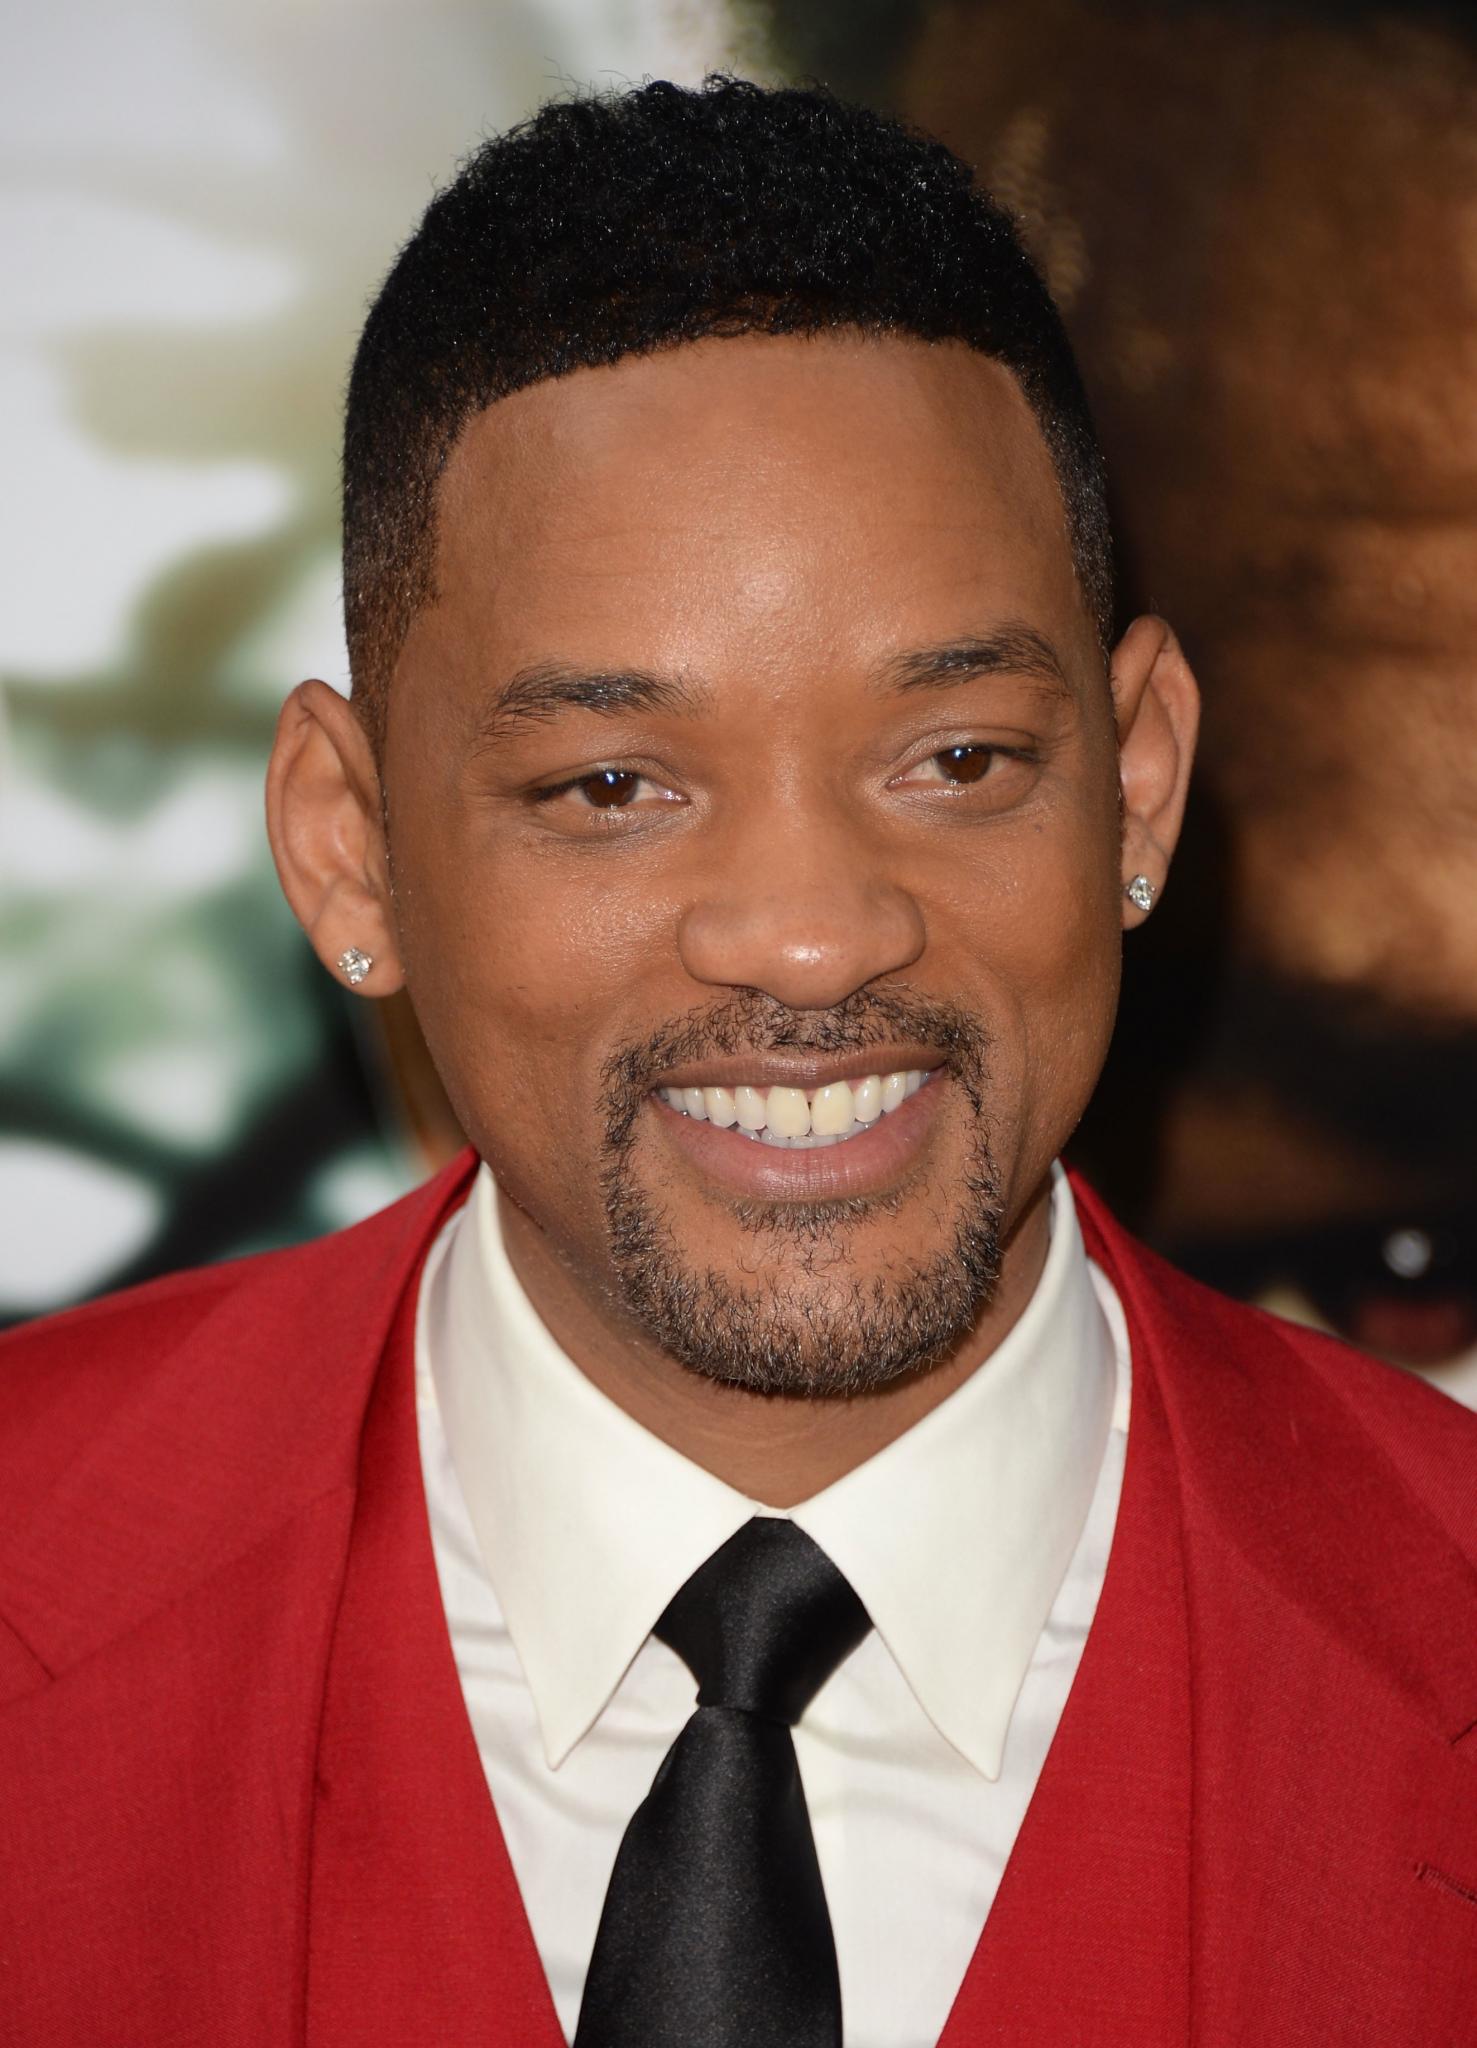 What's Your Favorite Will Smith Movie?
